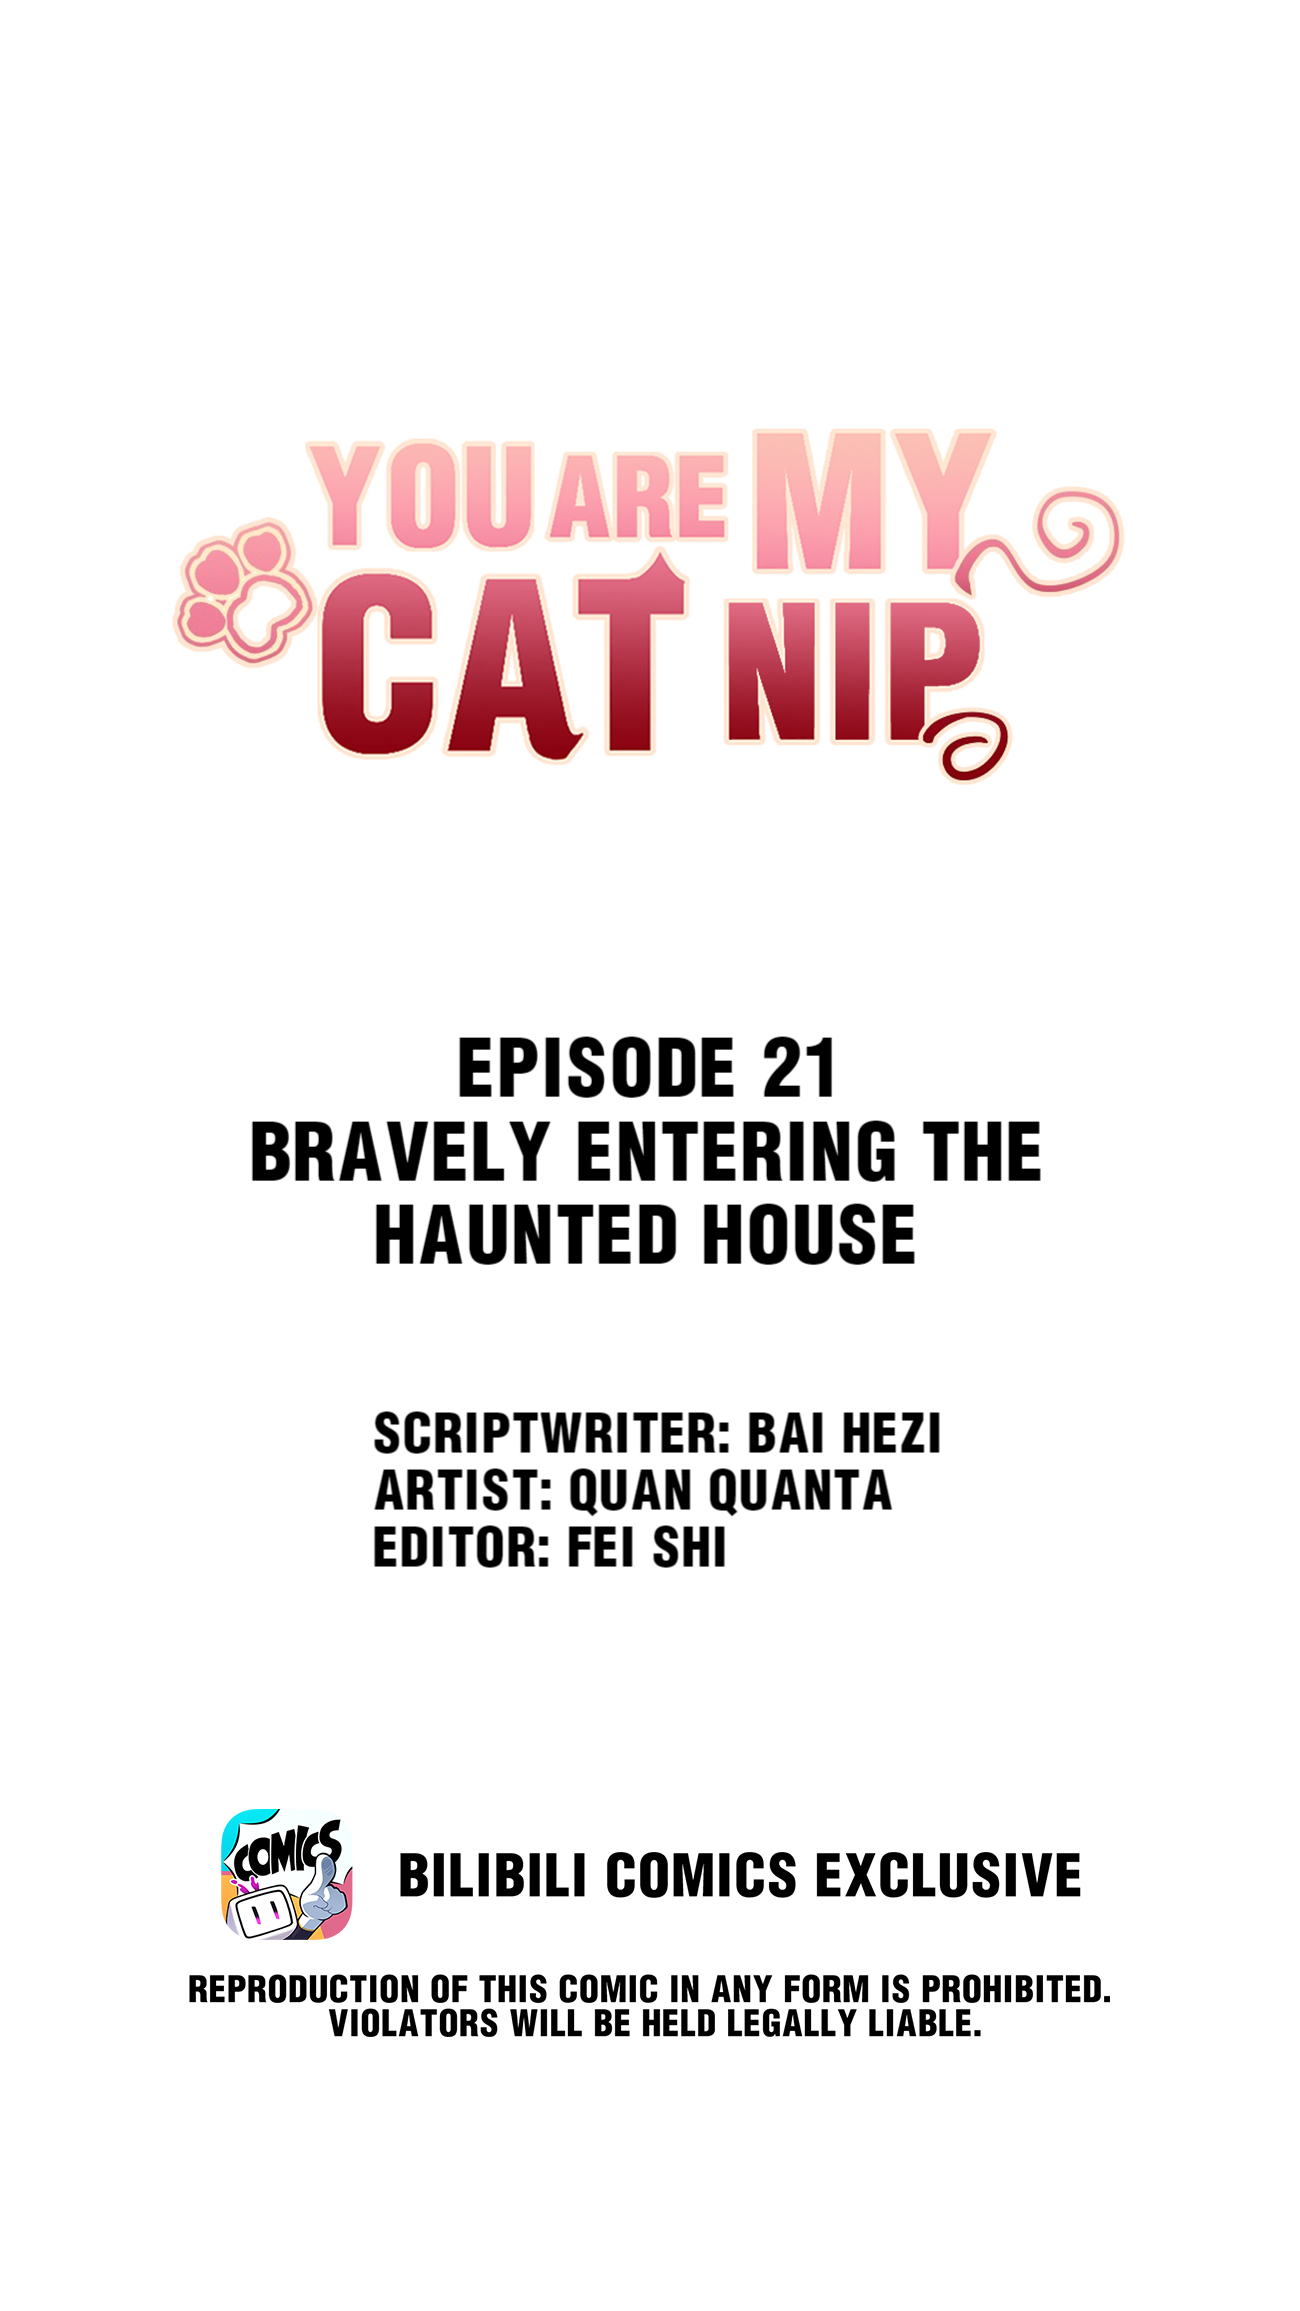 You Are My Catnip 21.1 Bravely Entering The Haunted House